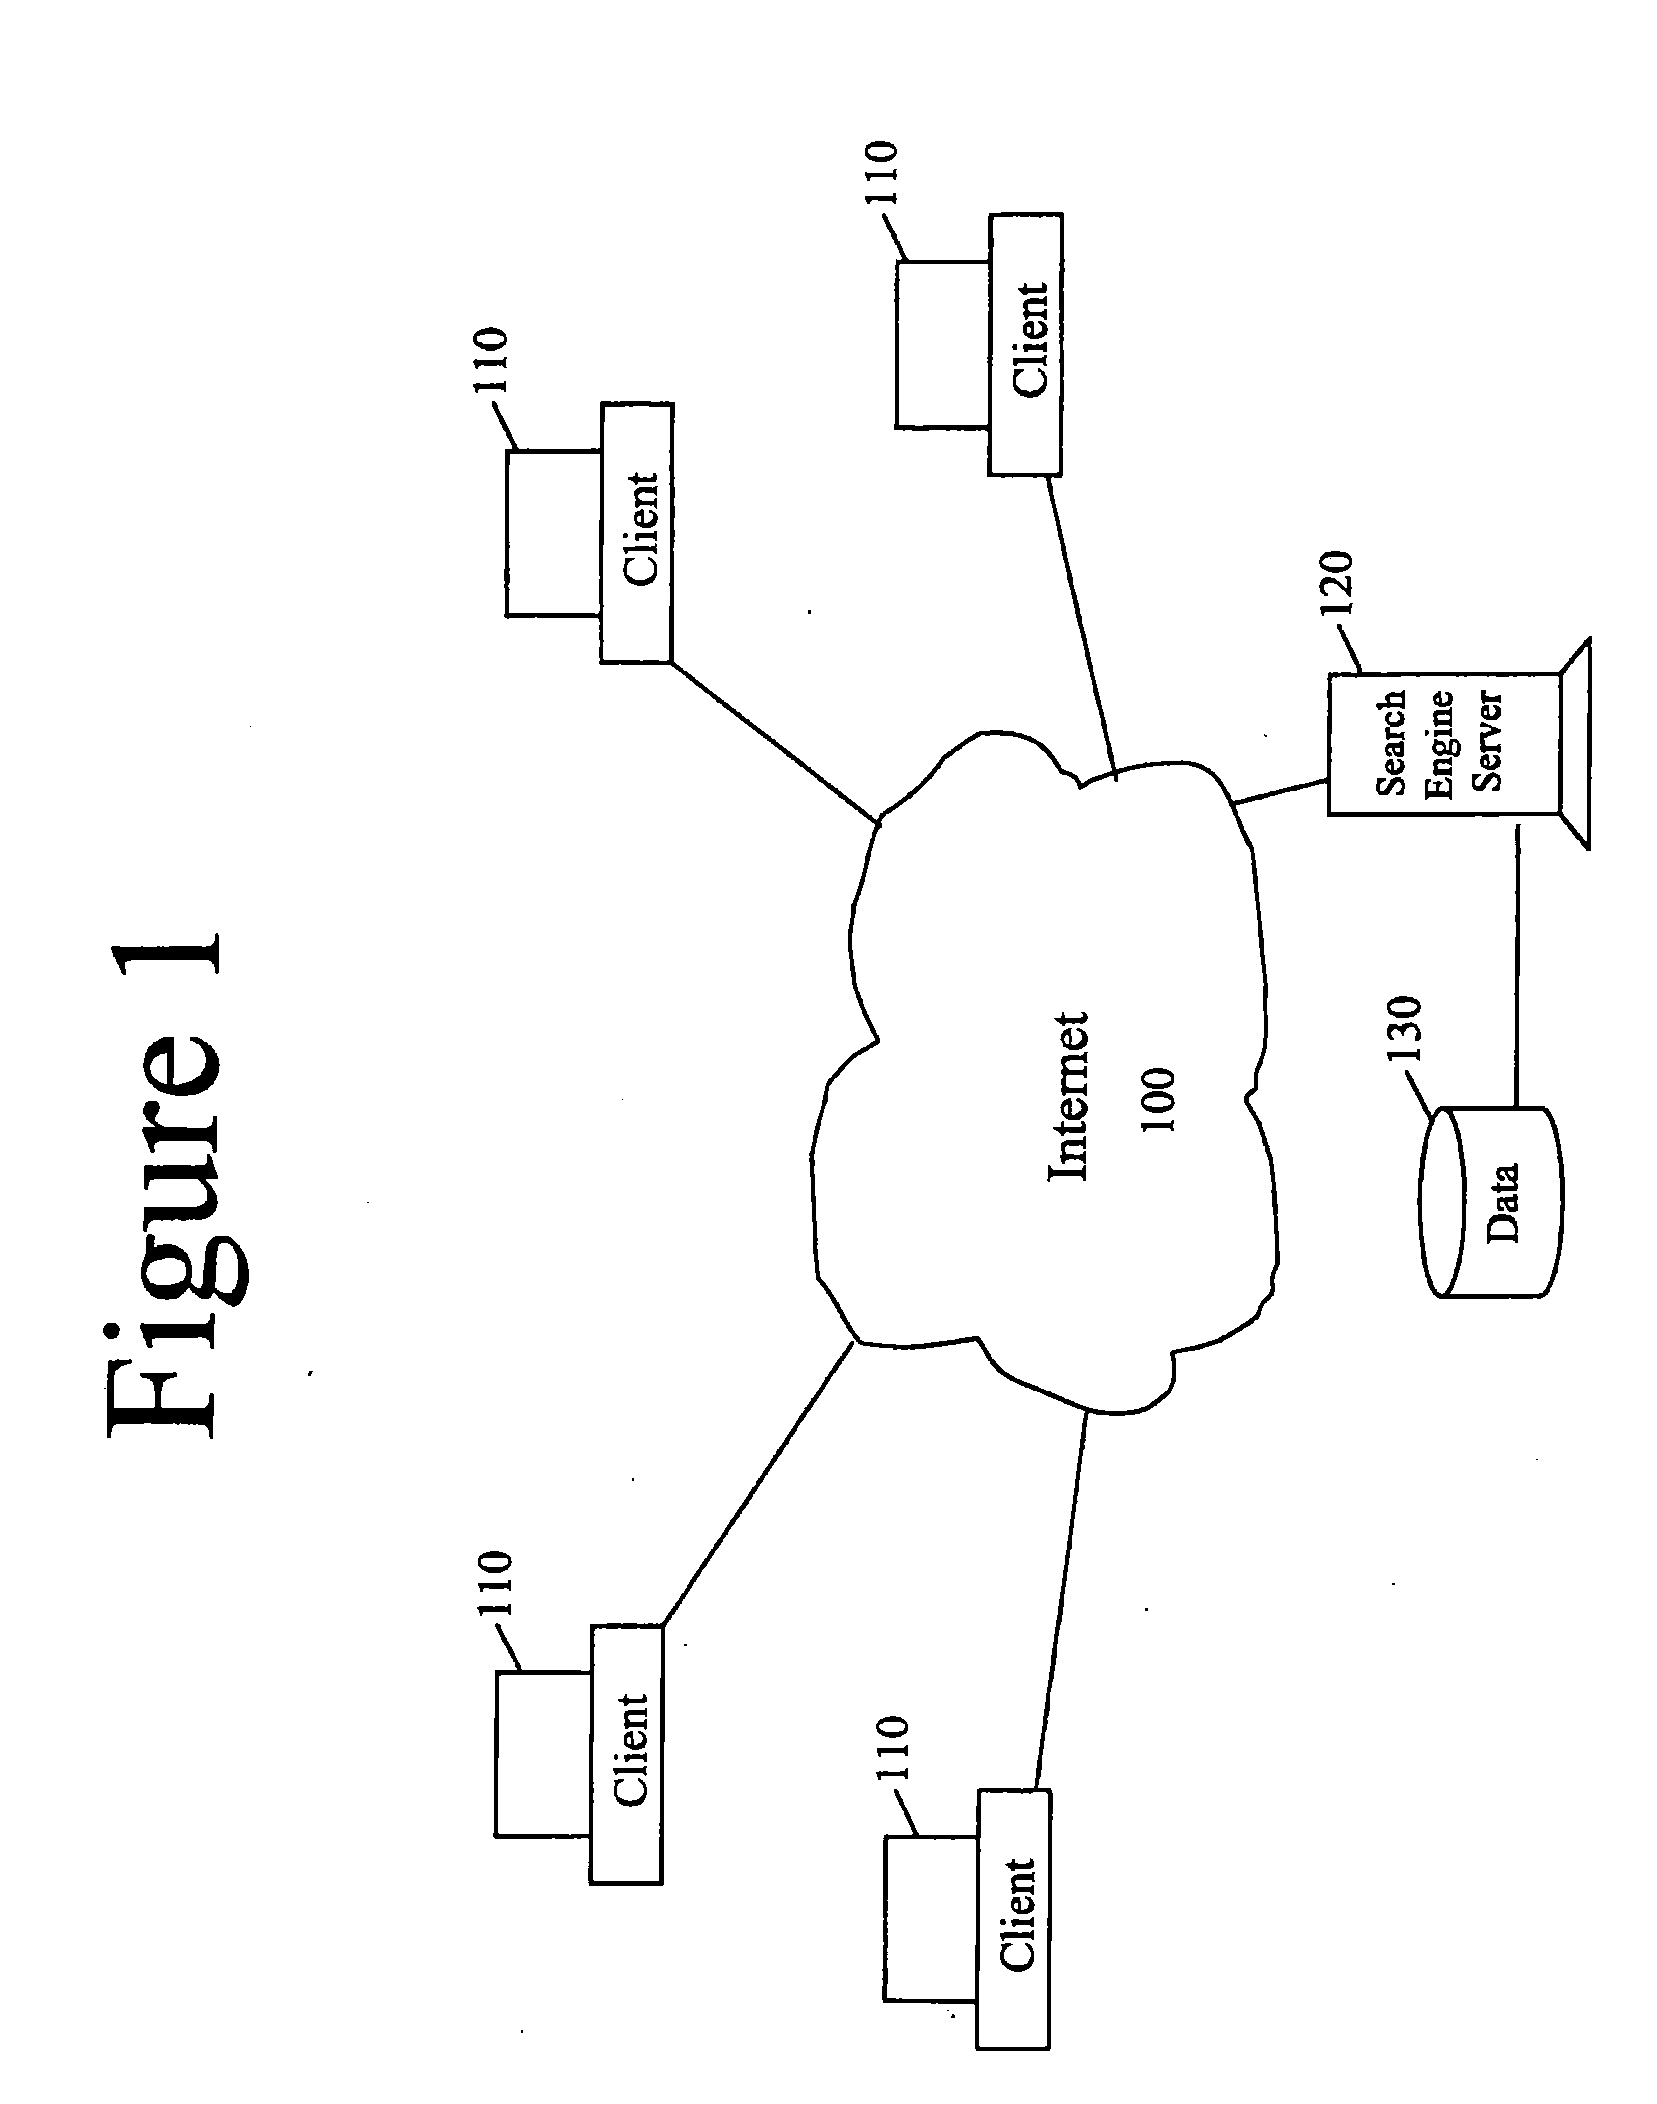 Graphical Internet Search System and Methods